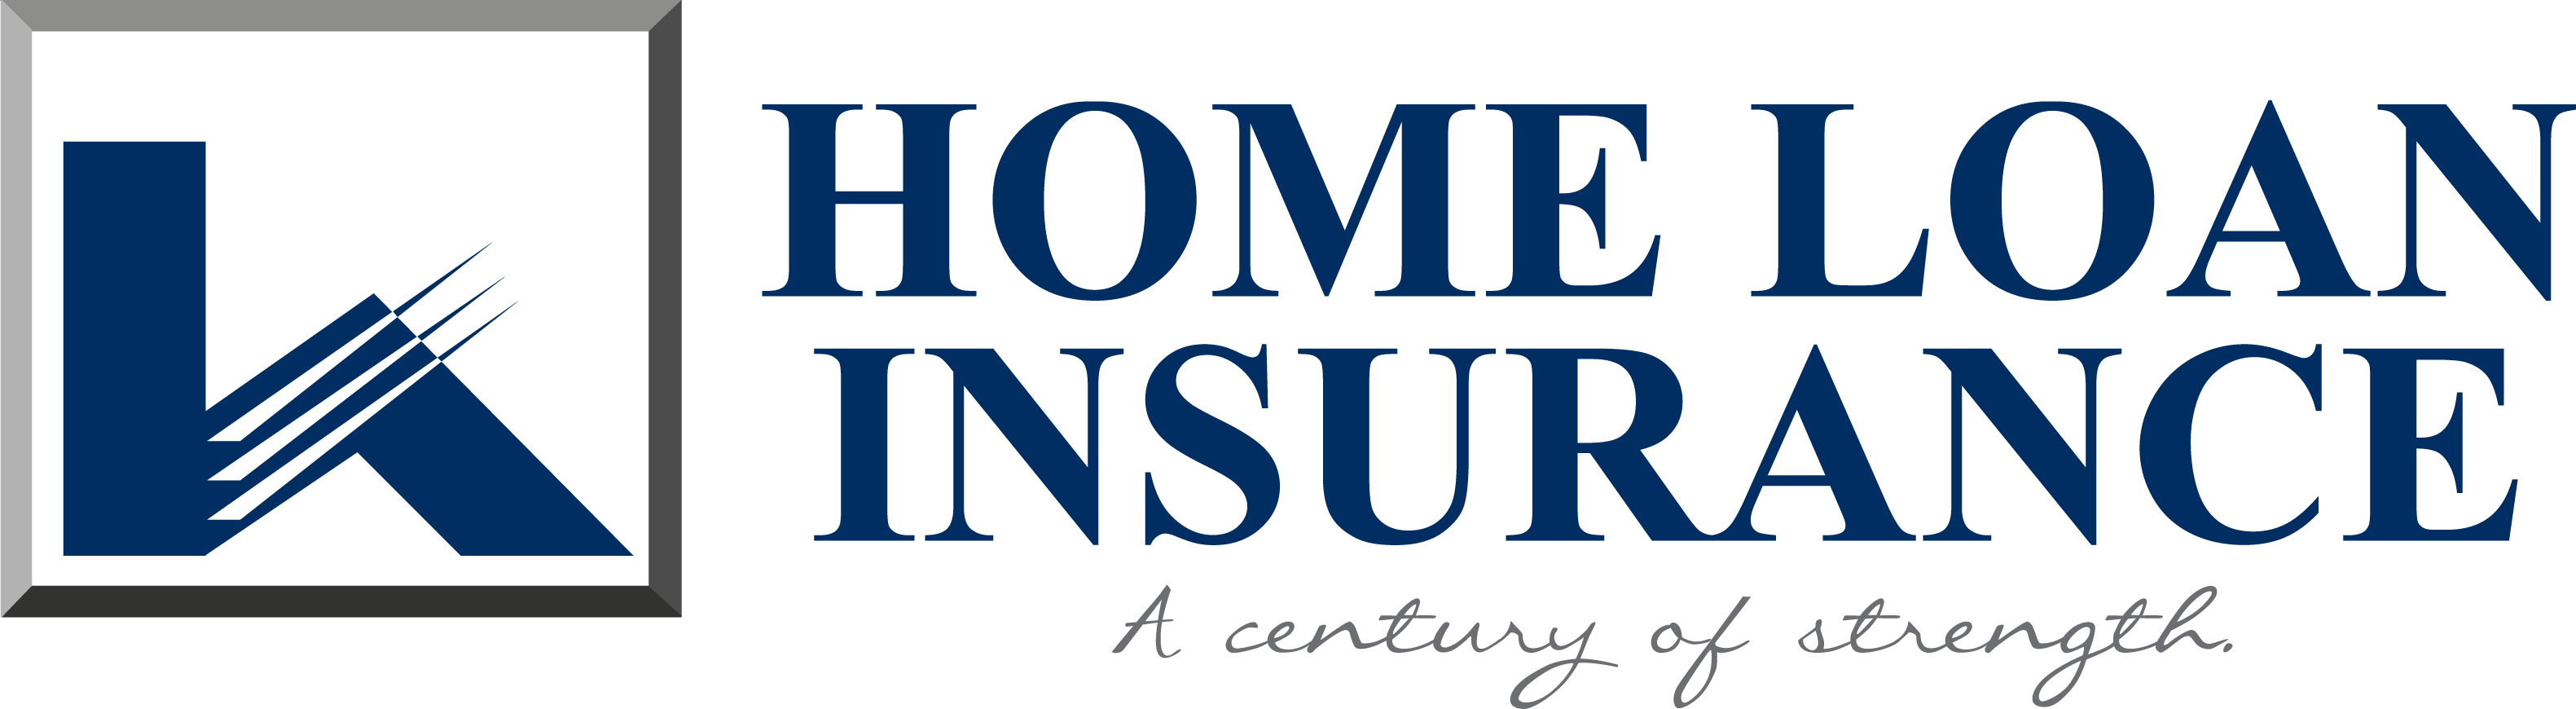 Home Loan & Investment Co. Company Logo